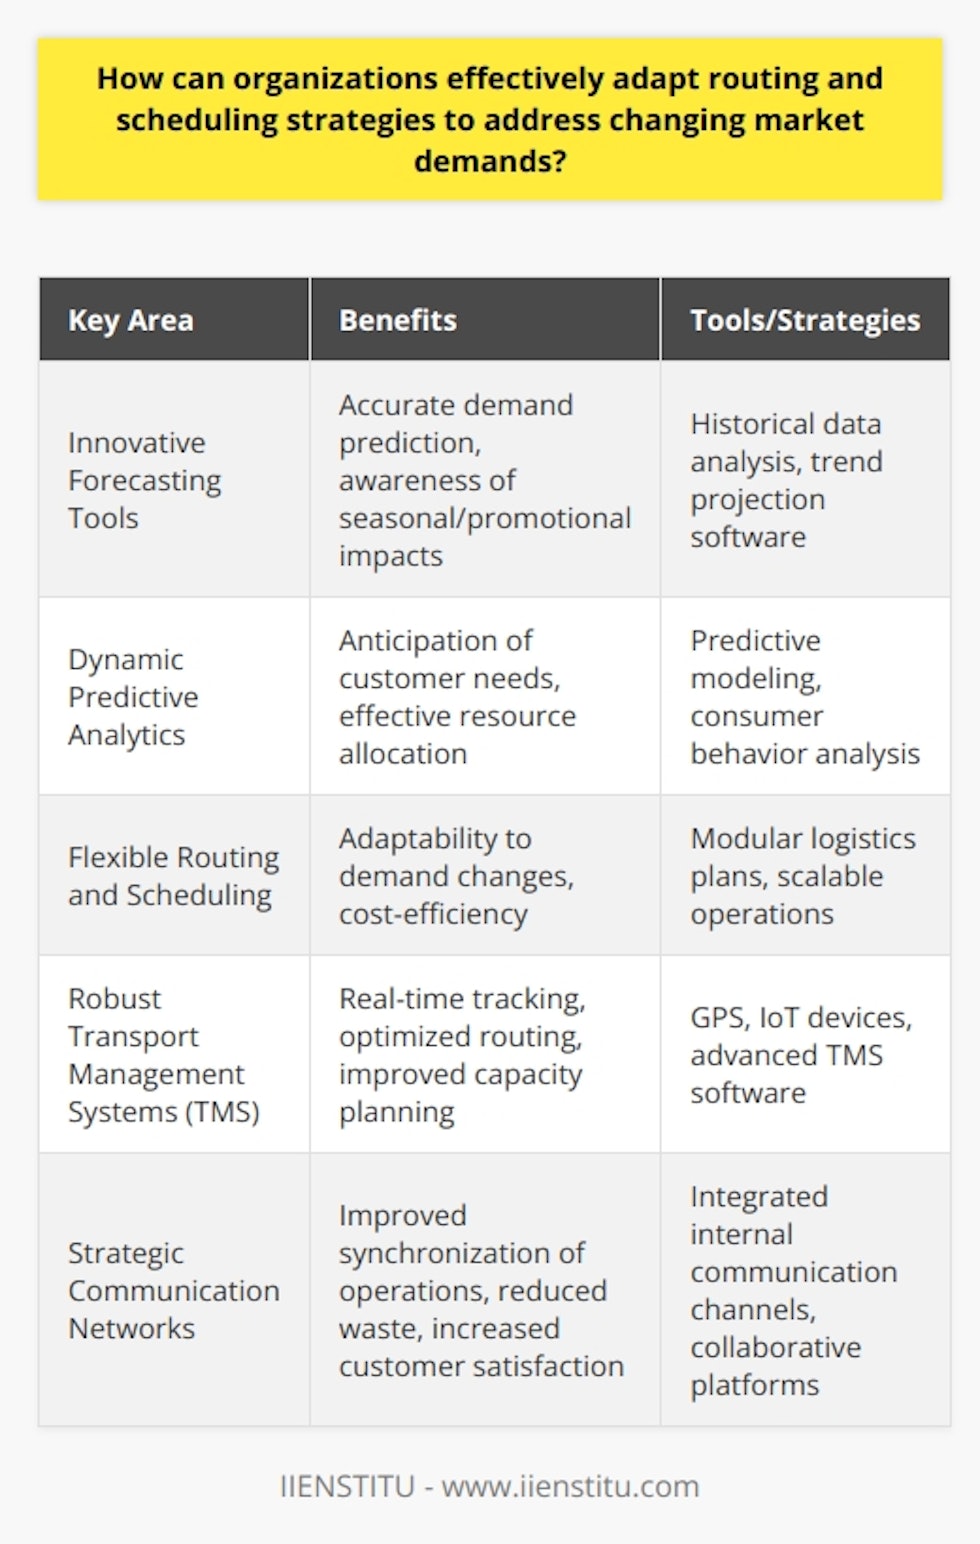 Organizations seeking to optimize logistics amidst fluctuating market demands must adopt an agile approach that can swiftly adjust to new patterns and consumer behaviors. To achieve this, they can focus on several key areas:Innovative Forecasting Tools: By leveraging state-of-the-art forecasting tools that analyze historical data trends, organizations can project future demand with greater accuracy. Such tools can pinpoint seasonal variations, promotional impacts, and other demand influencers that affect routing and scheduling decisions.Dynamic Predictive Analytics: Predictive analytics play a pivotal role in projecting consumer behavior. With the latest predictive models, organizations can fine-tune their supply chains, anticipating customer needs with precision. By recognizing and reacting to these trends ahead of time, businesses can allocate resources effectively to high-demand areas, thereby optimizing their logistic operations.Flexible Routing and Scheduling: In a dynamic marketplace, rigid logistics plans may falter. Instead, adaptive routing and scheduling that recognize and accommodate for swift changes in demand are crucial. These modular logistics plans allow companies to scale operations up or down depending on the market's immediate needs, enabling them to address peak demands effectively without incurring unnecessary costs during downturns.Robust Transport Management Systems: The implementation of an advanced TMS can revolutionize how an organization reacts to changing market needs. A sophisticated TMS offers real-time tracking, route optimization, and capacity planning. Merging this with technologies like GPS and IoT devices equips organizations with instant data on traffic conditions, delivery statuses, and vehicle performance, making routing and scheduling more responsive and less error-prone.Strategic Communication Networks: Prompt adaptation to market shifts requires seamless communication channels within the organization. When logistics teams can swiftly share information with production and sales departments, the company can synchronize its operations with market rhythms. Such integrated communication networks support proactive scheduling, effective demand forecasting, and inventory management, minimizing waste and enhancing customer satisfaction.To summarize, by adopting a strategy that incorporates cutting-edge forecasting, applies predictive analytics, maintains flexible routing and scheduling frameworks, invests in advanced transport management systems, and fosters strong communication lines within the organization, businesses can ensure that their logistics operations are resilient, responsive, and capable of meeting the ebb and flow of market demands. These steps enable organizations to stay competitive and to provide their customers with unparalleled service, regardless of the market's constant transformations.